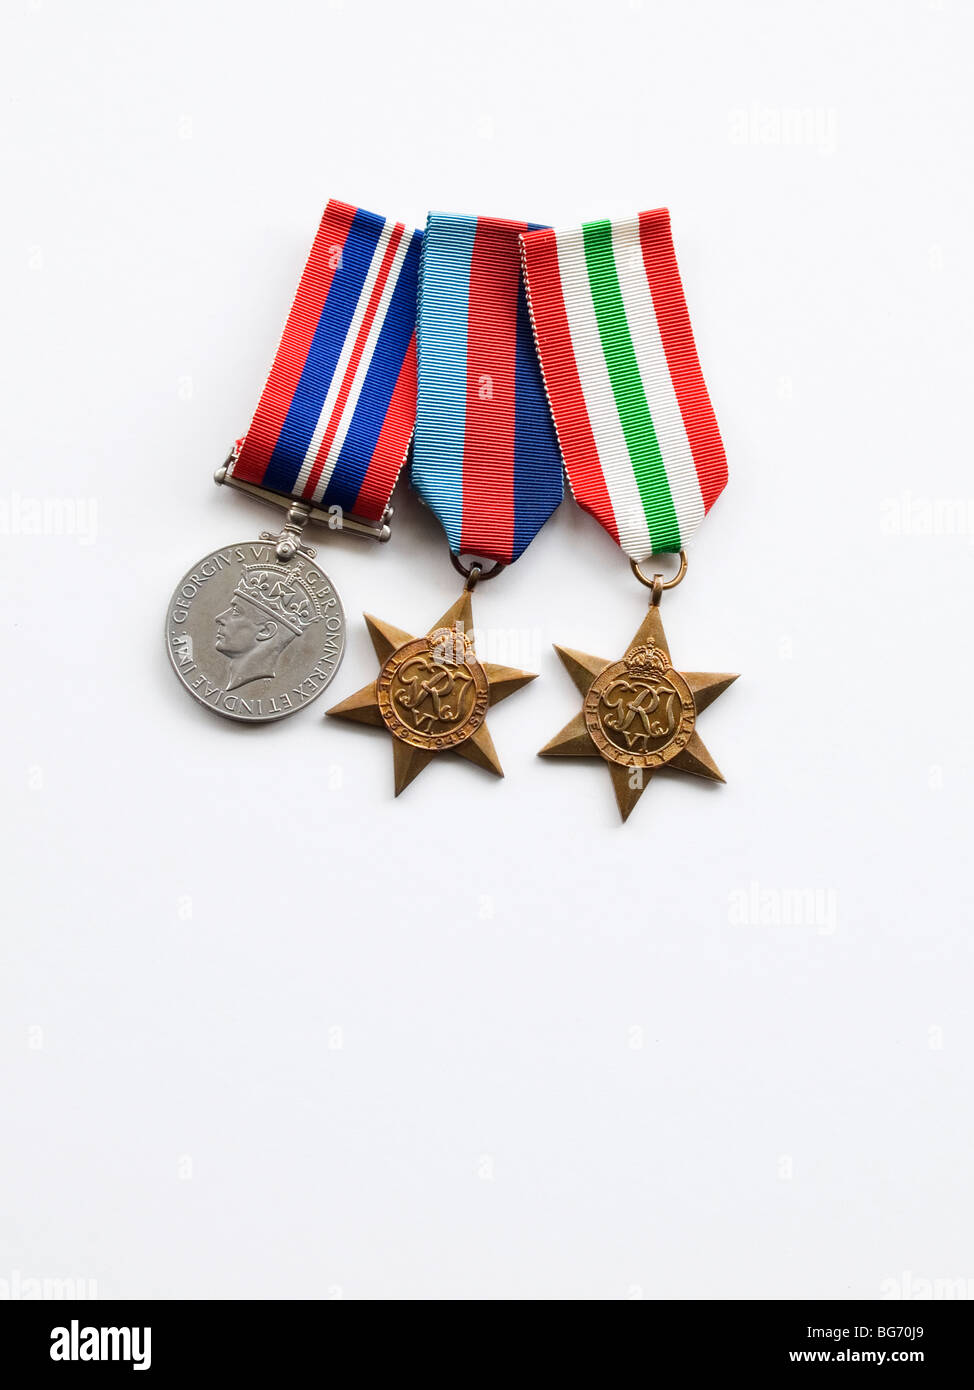 The World War 2 Medal, WW2 Star and the Italy Star awarded to British and Commonwealth Troops who served in Italy o1939-1945 Stock Photo